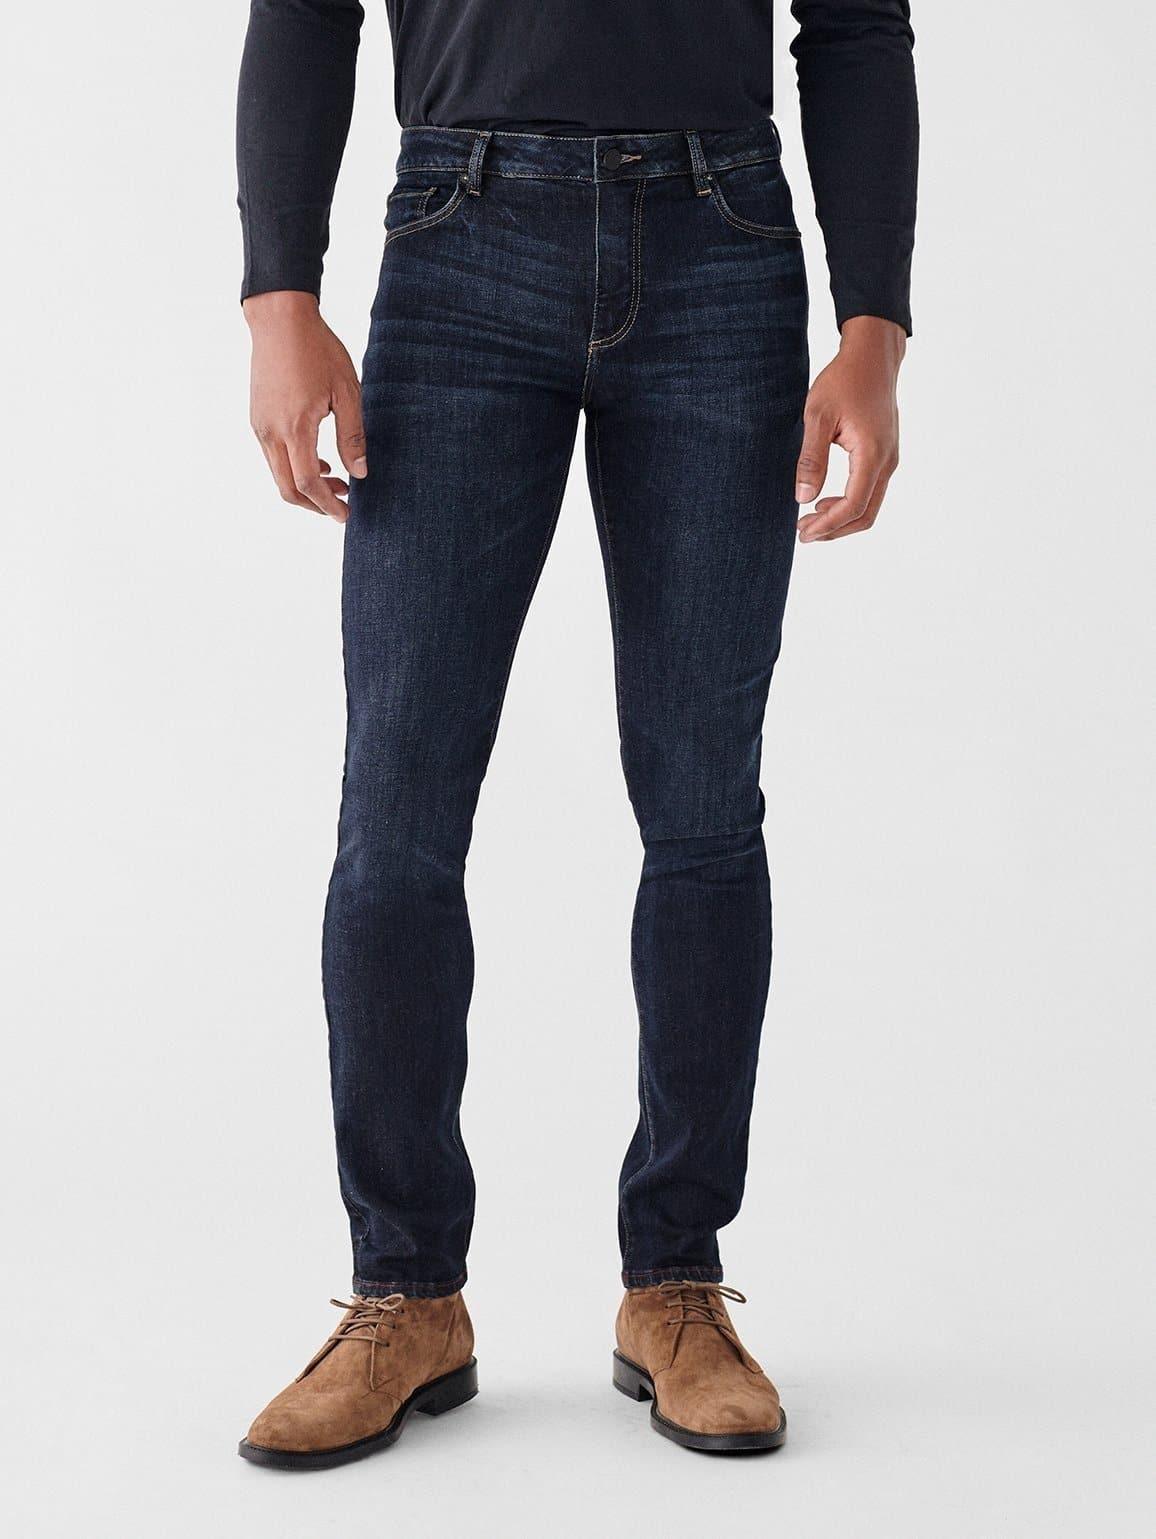 Laflamme- Jeans Nick lakeside - DL1961